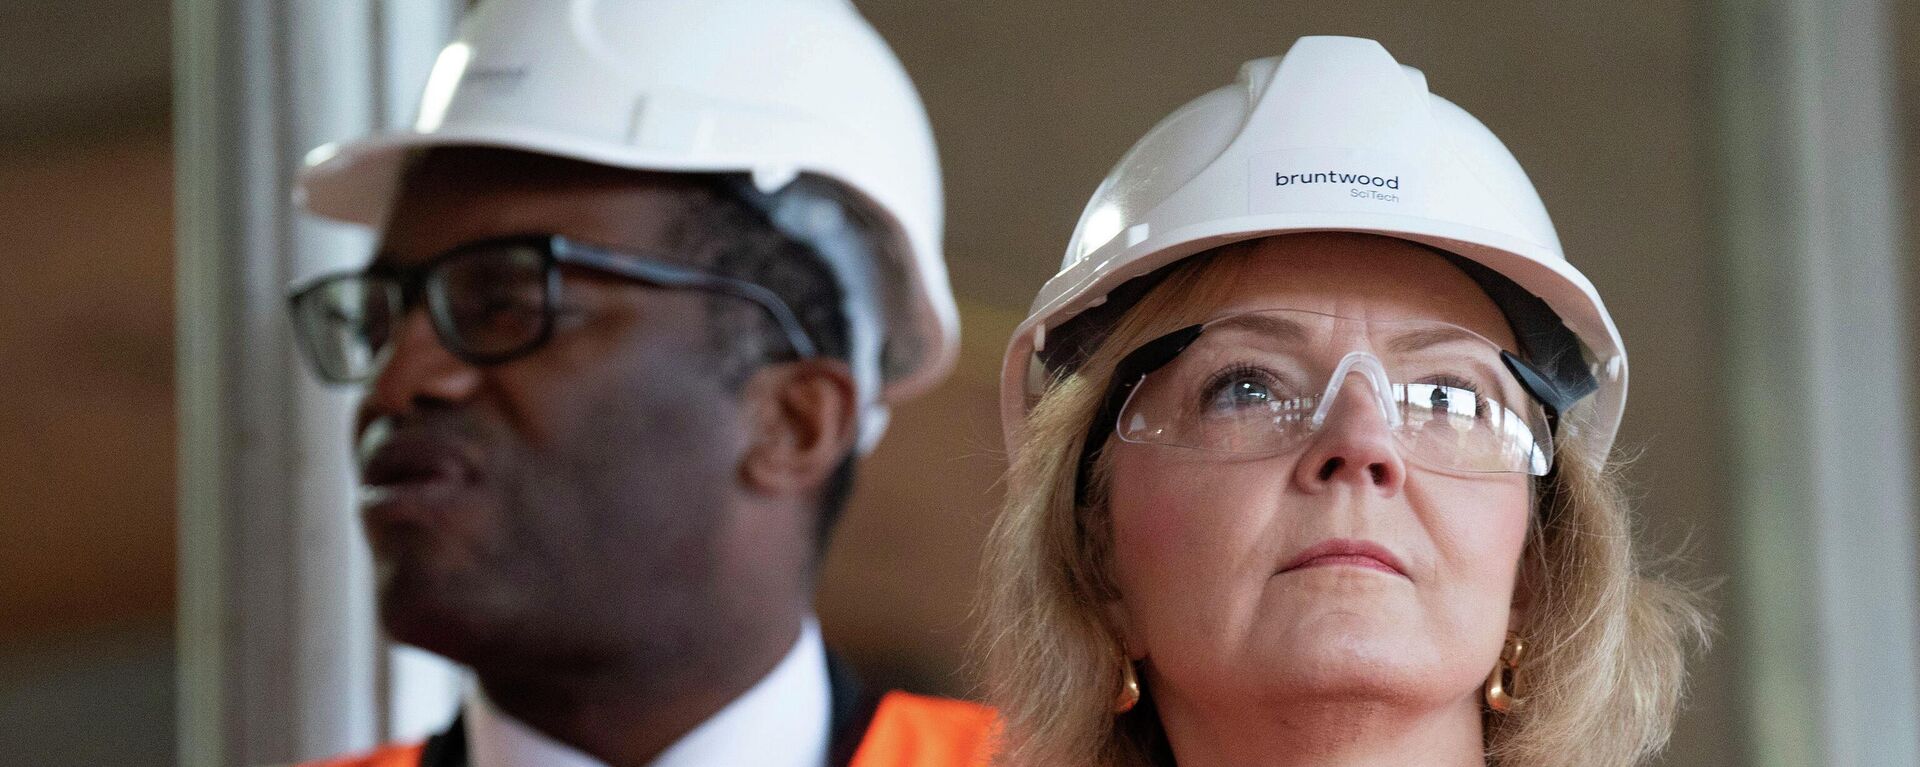 Britain's Prime Minister Liz Truss, foreground, and Chancellor of the Exchequer Kwasi Kwarteng - Sputnik International, 1920, 04.10.2022